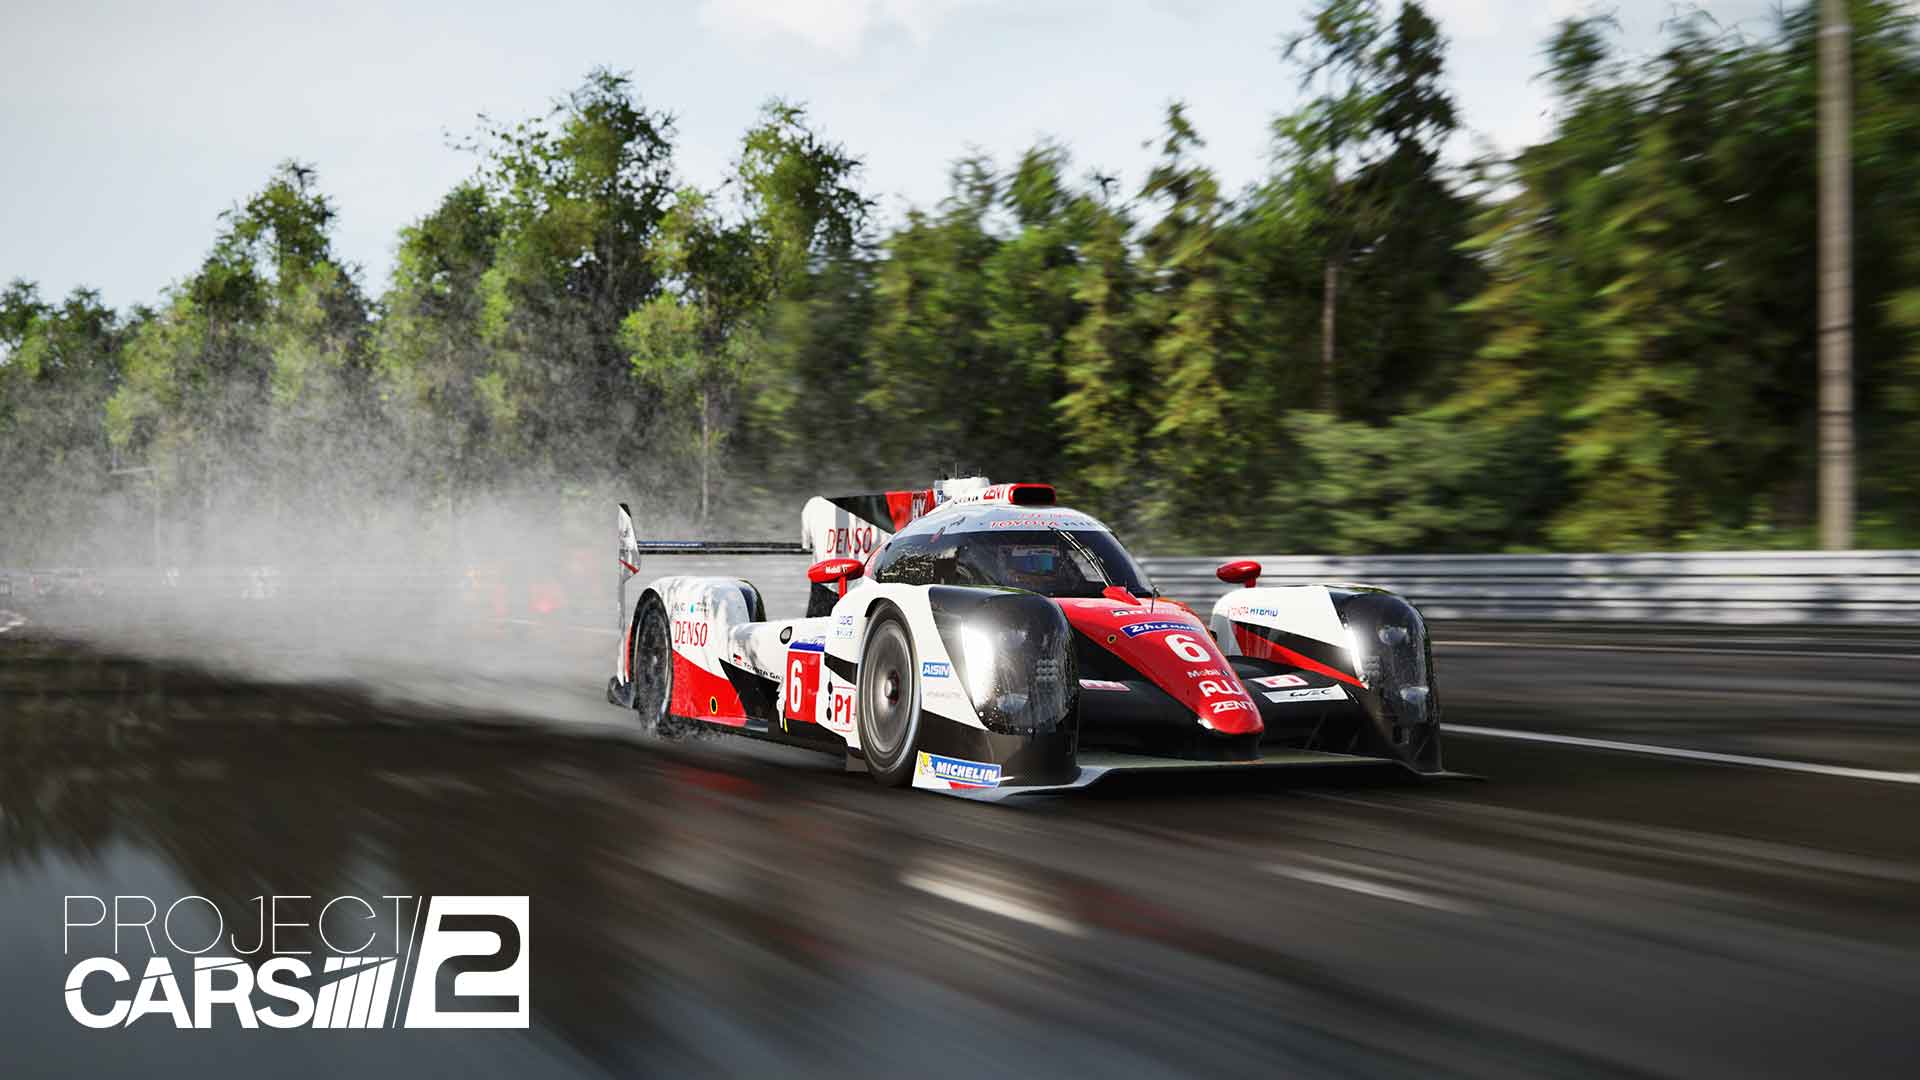 download project cars ps5